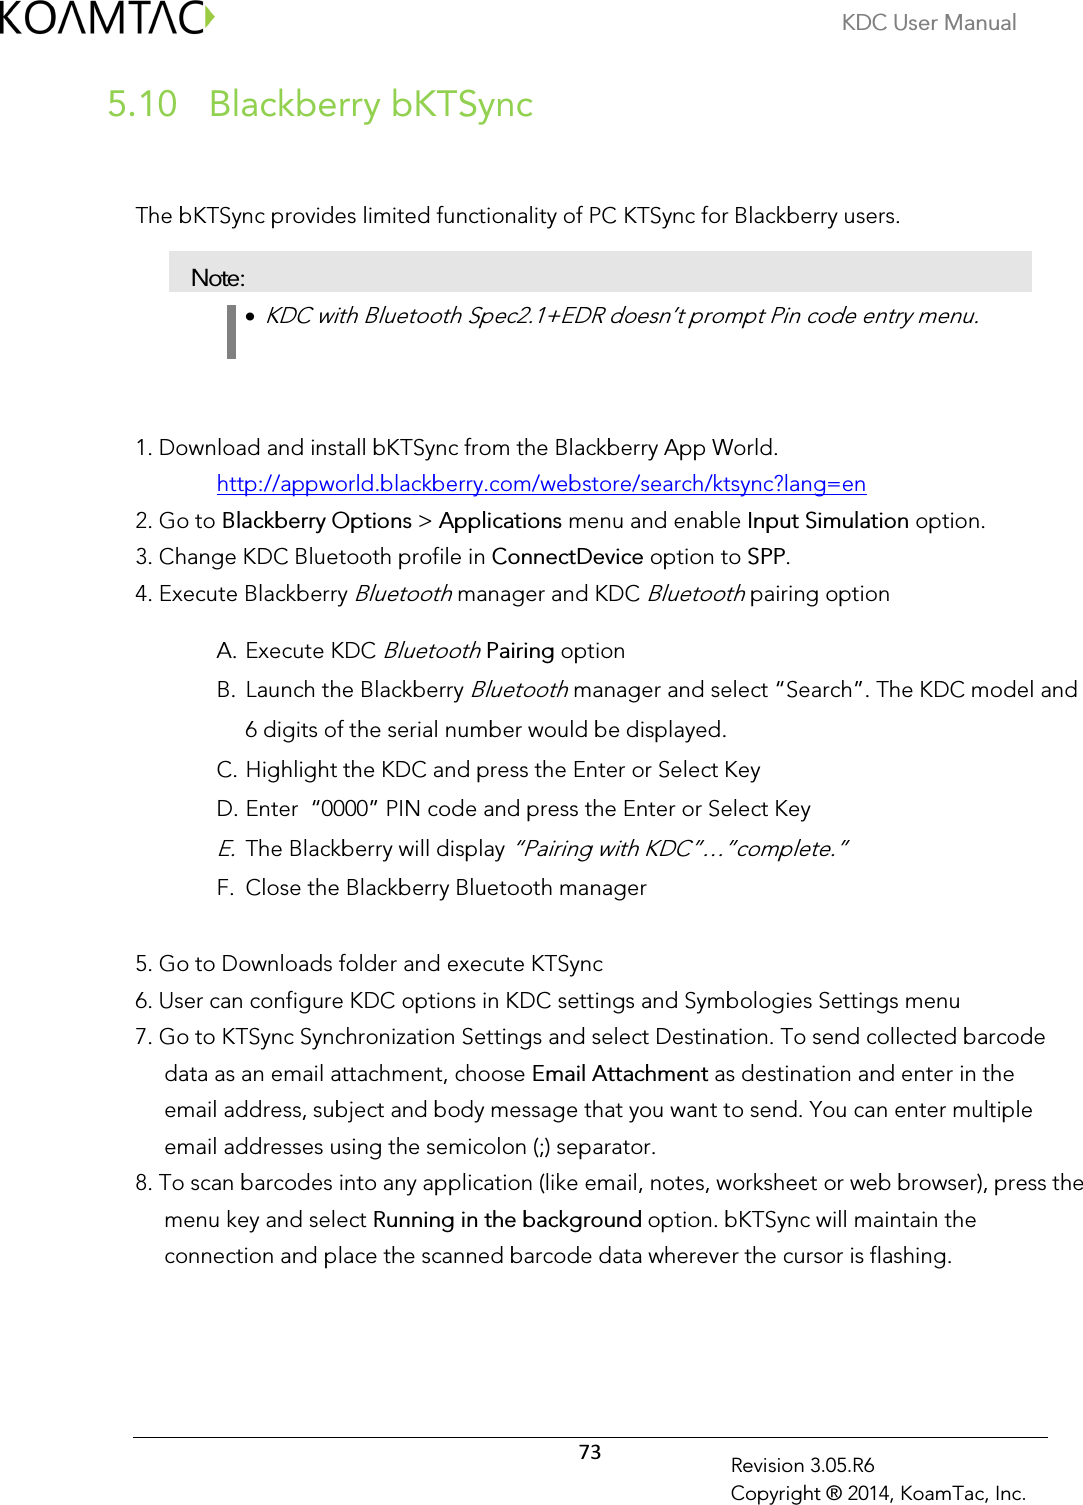 KDC User Manual  73 Revision 3.05.R6 Copyright ® 2014, KoamTac, Inc.  Blackberry bKTSync 5.10  The bKTSync provides limited functionality of PC KTSync for Blackberry users.  Note: •  KDC with Bluetooth Spec2.1+EDR doesn’t prompt Pin code entry menu.    1. Download and install bKTSync from the Blackberry App World. http://appworld.blackberry.com/webstore/search/ktsync?lang=en 2. Go to Blackberry Options &gt; Applications menu and enable Input Simulation option. 3. Change KDC Bluetooth profile in ConnectDevice option to SPP. 4. Execute Blackberry Bluetooth manager and KDC Bluetooth pairing option A. Execute KDC Bluetooth Pairing option  B. Launch the Blackberry Bluetooth manager and select “Search”. The KDC model and 6 digits of the serial number would be displayed. C. Highlight the KDC and press the Enter or Select Key D. Enter  “0000” PIN code and press the Enter or Select Key E. The Blackberry will display “Pairing with KDC”…”complete.” F. Close the Blackberry Bluetooth manager 5. Go to Downloads folder and execute KTSync 6. User can configure KDC options in KDC settings and Symbologies Settings menu 7. Go to KTSync Synchronization Settings and select Destination. To send collected barcode data as an email attachment, choose Email Attachment as destination and enter in the email address, subject and body message that you want to send. You can enter multiple email addresses using the semicolon (;) separator. 8. To scan barcodes into any application (like email, notes, worksheet or web browser), press the menu key and select Running in the background option. bKTSync will maintain the connection and place the scanned barcode data wherever the cursor is flashing.  